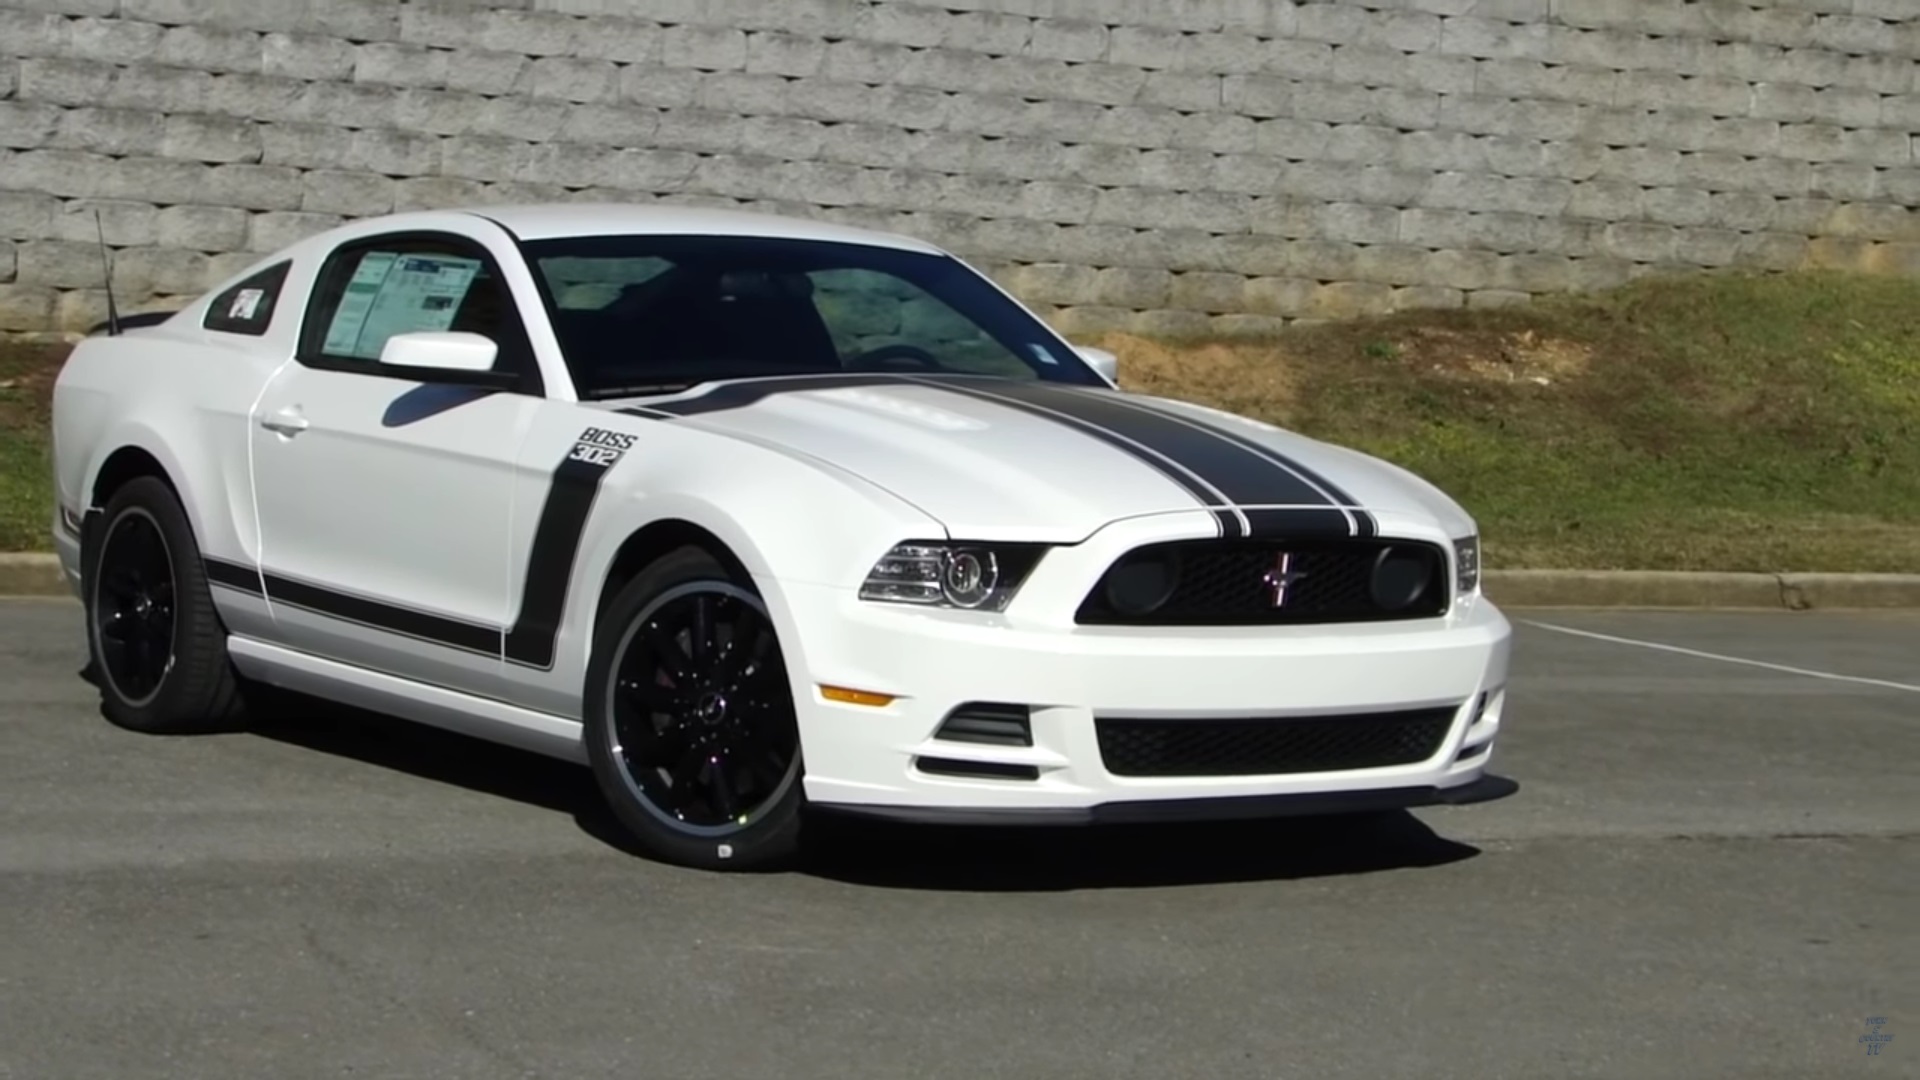 Video: 2013 Ford Mustang Boss 302 In-Depth Tour